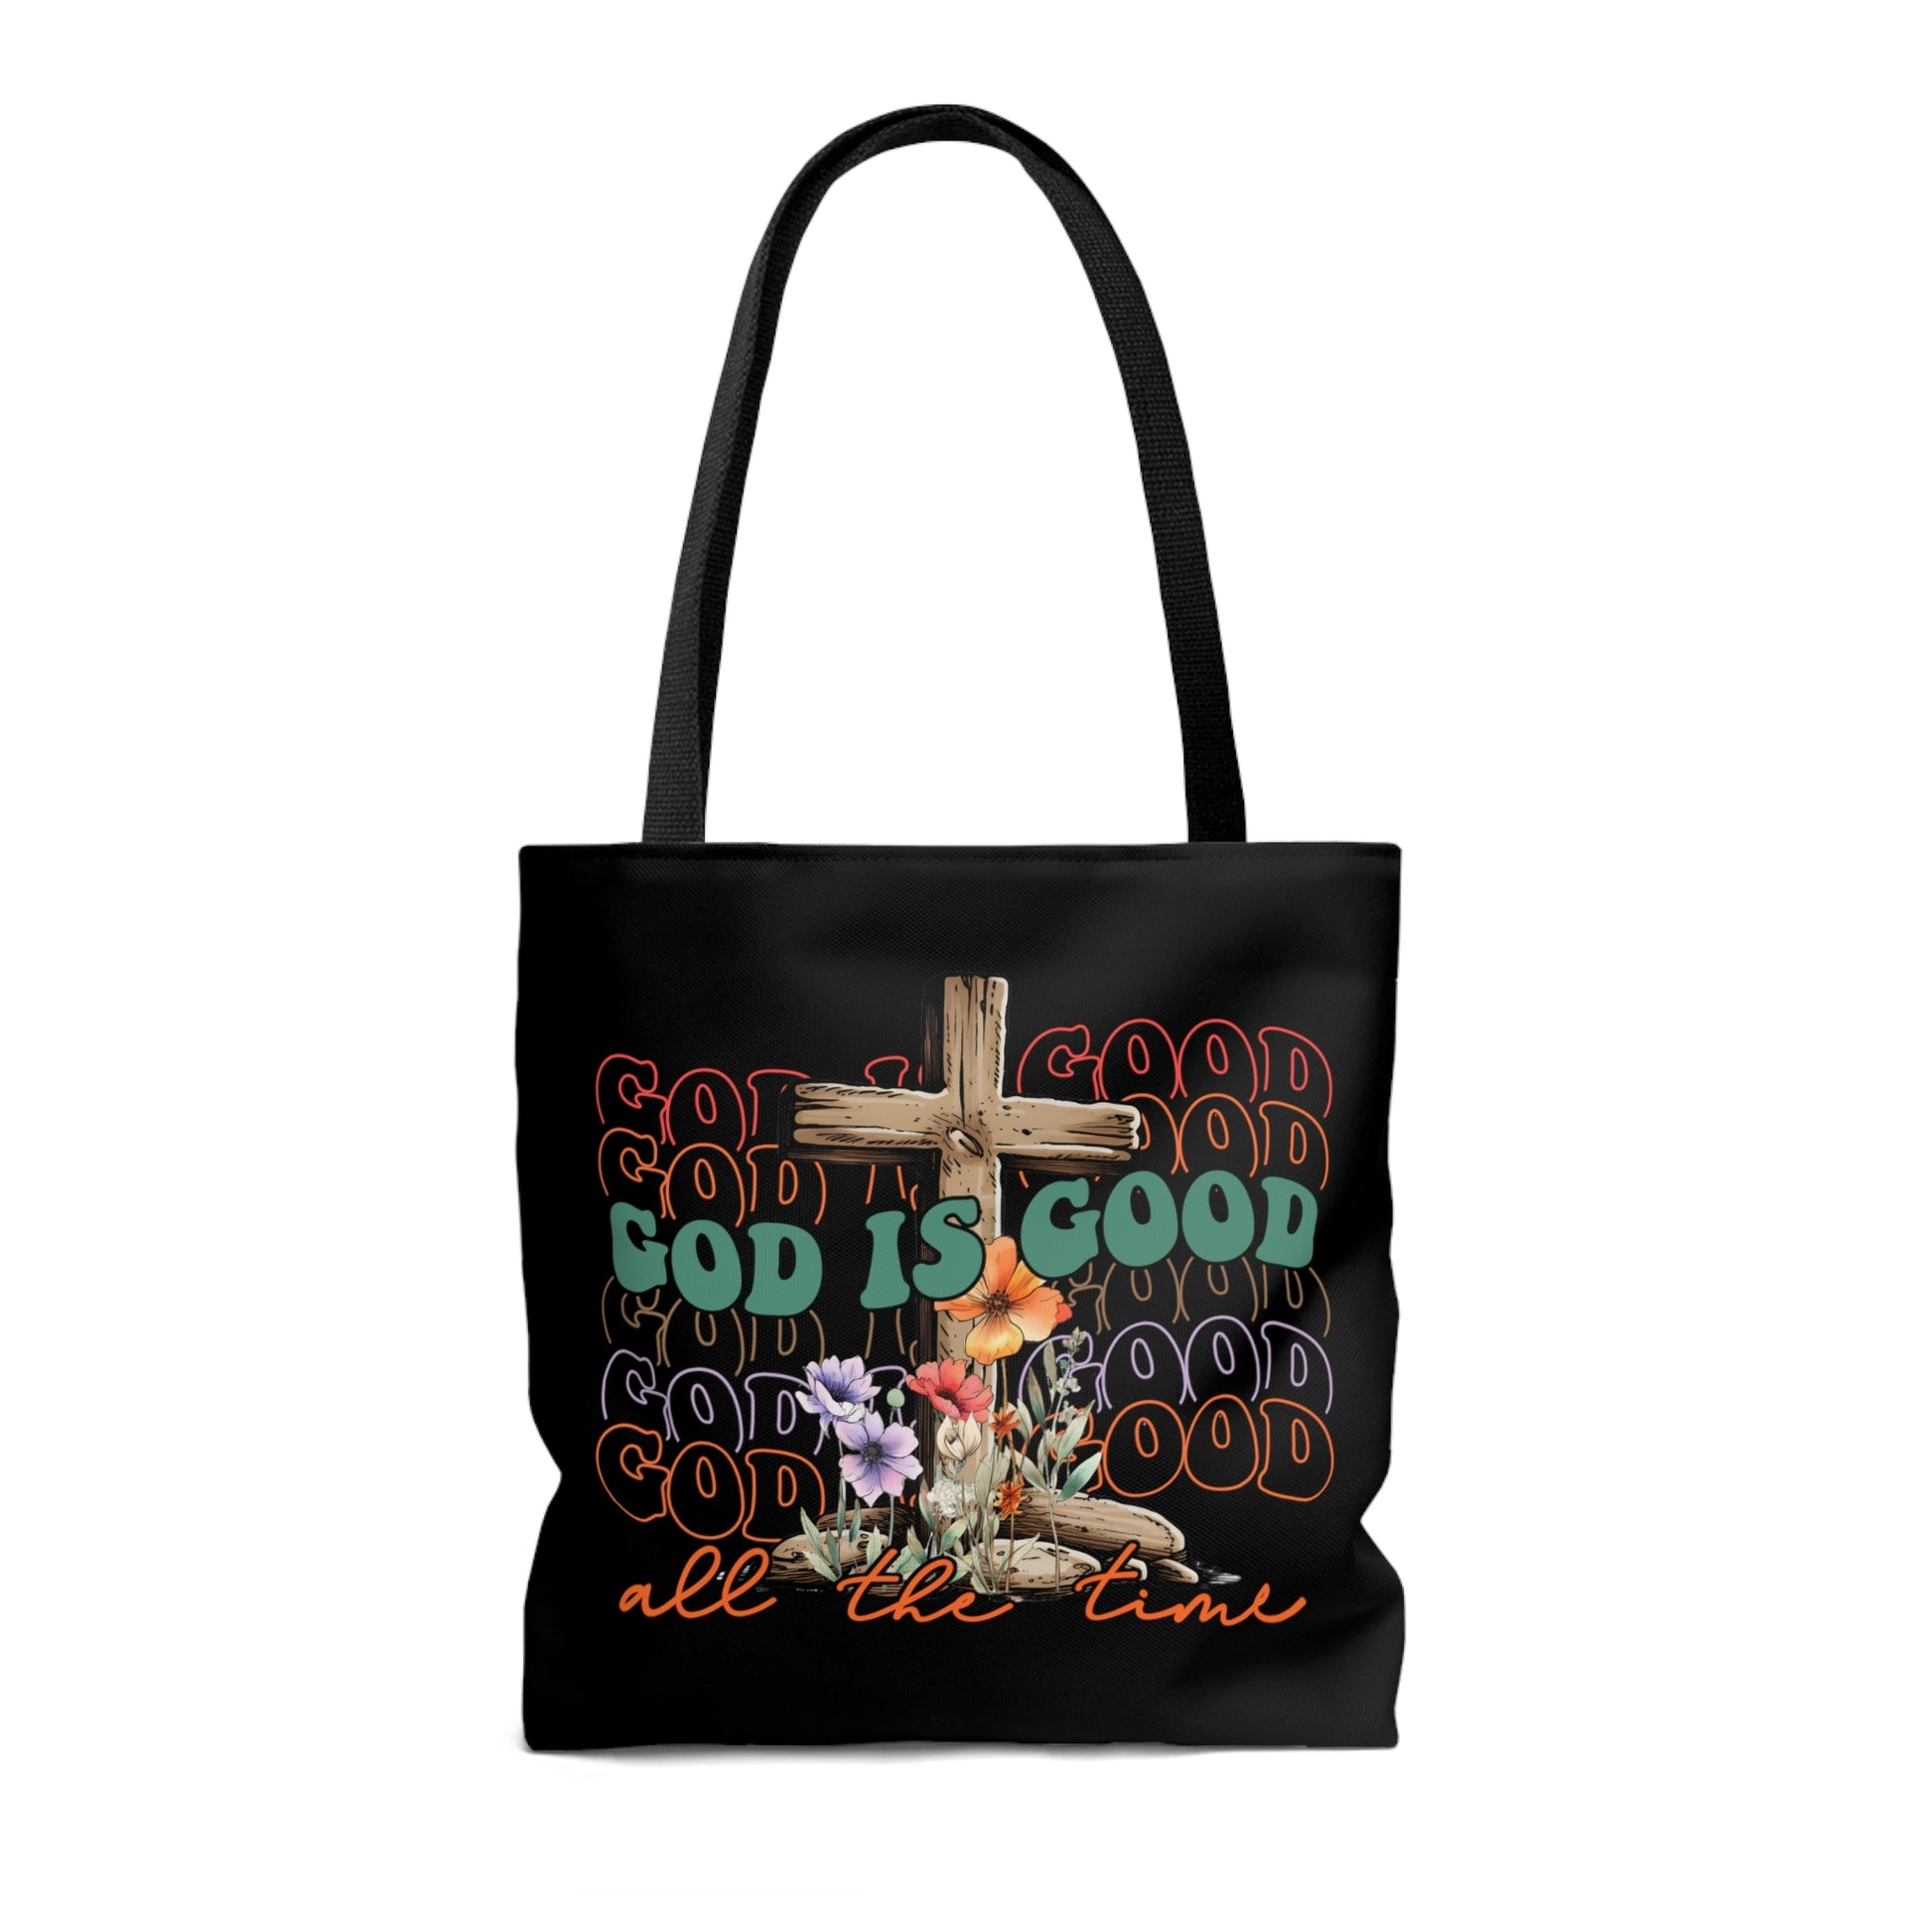 God is Good Religious Tote Bag, Christian Gifts